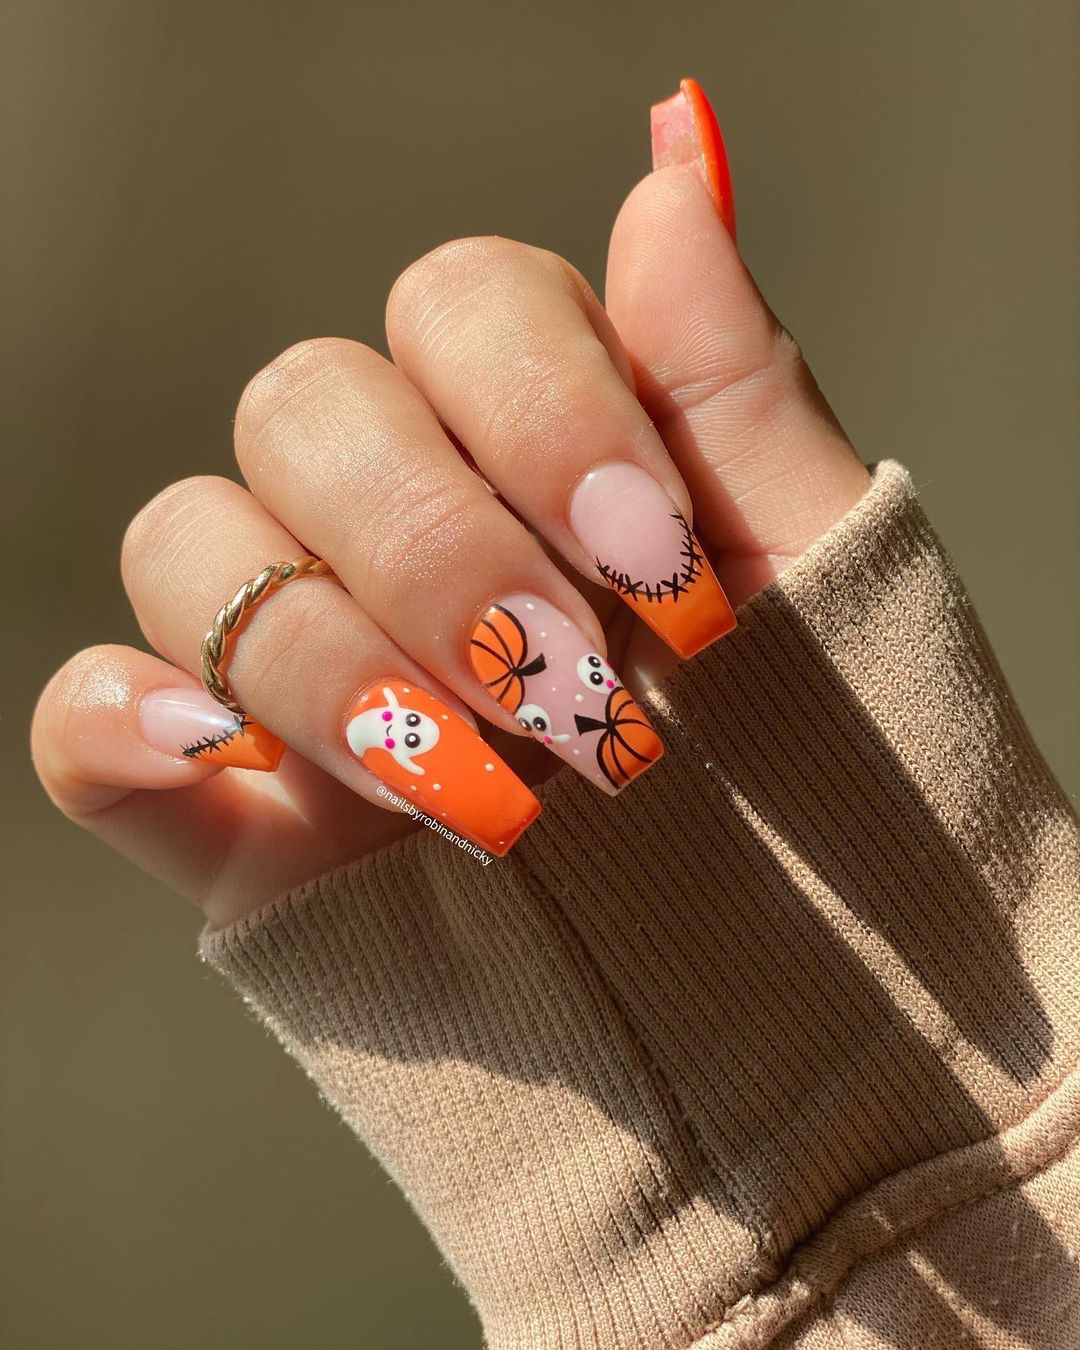 22 Of The Hottest Nail Ideas That you will love